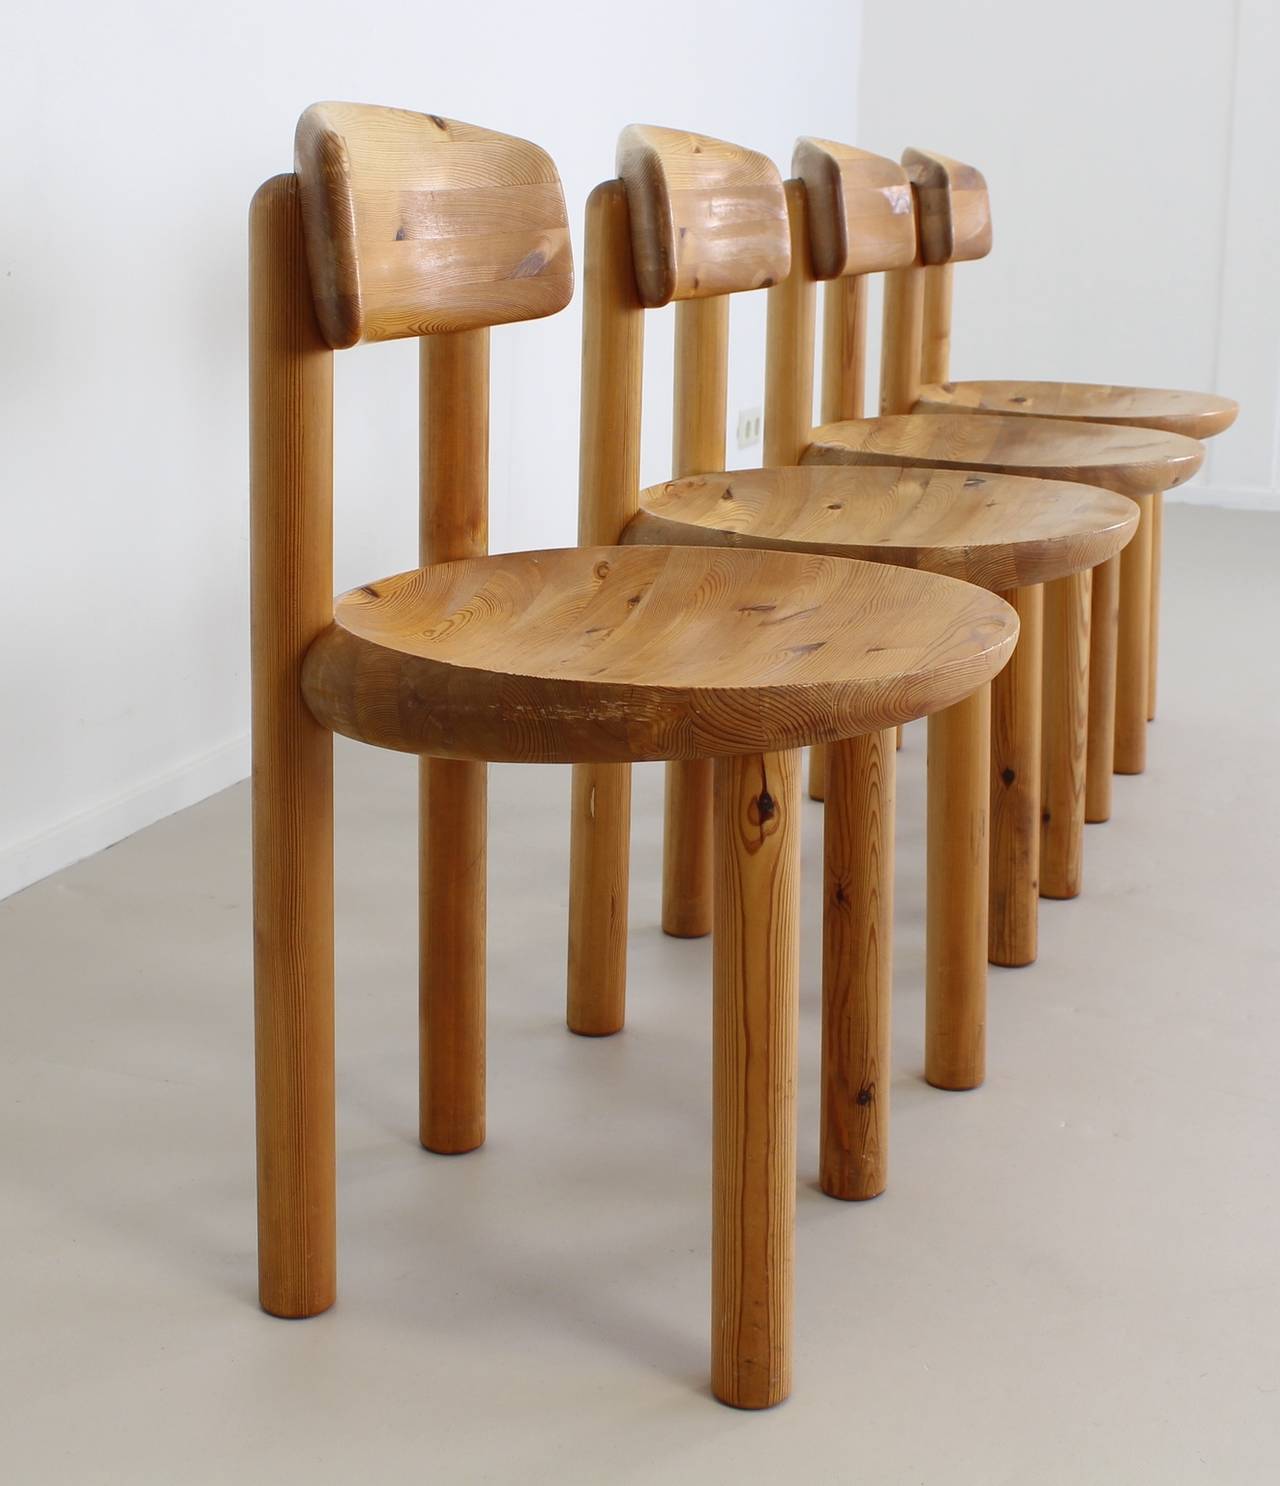 Typical 1970s dining chairs.
Designer: Rainer Daumiller, 1970.
Manufacturer: Hirtshals Sawmill.
Pine wood with organic seating.